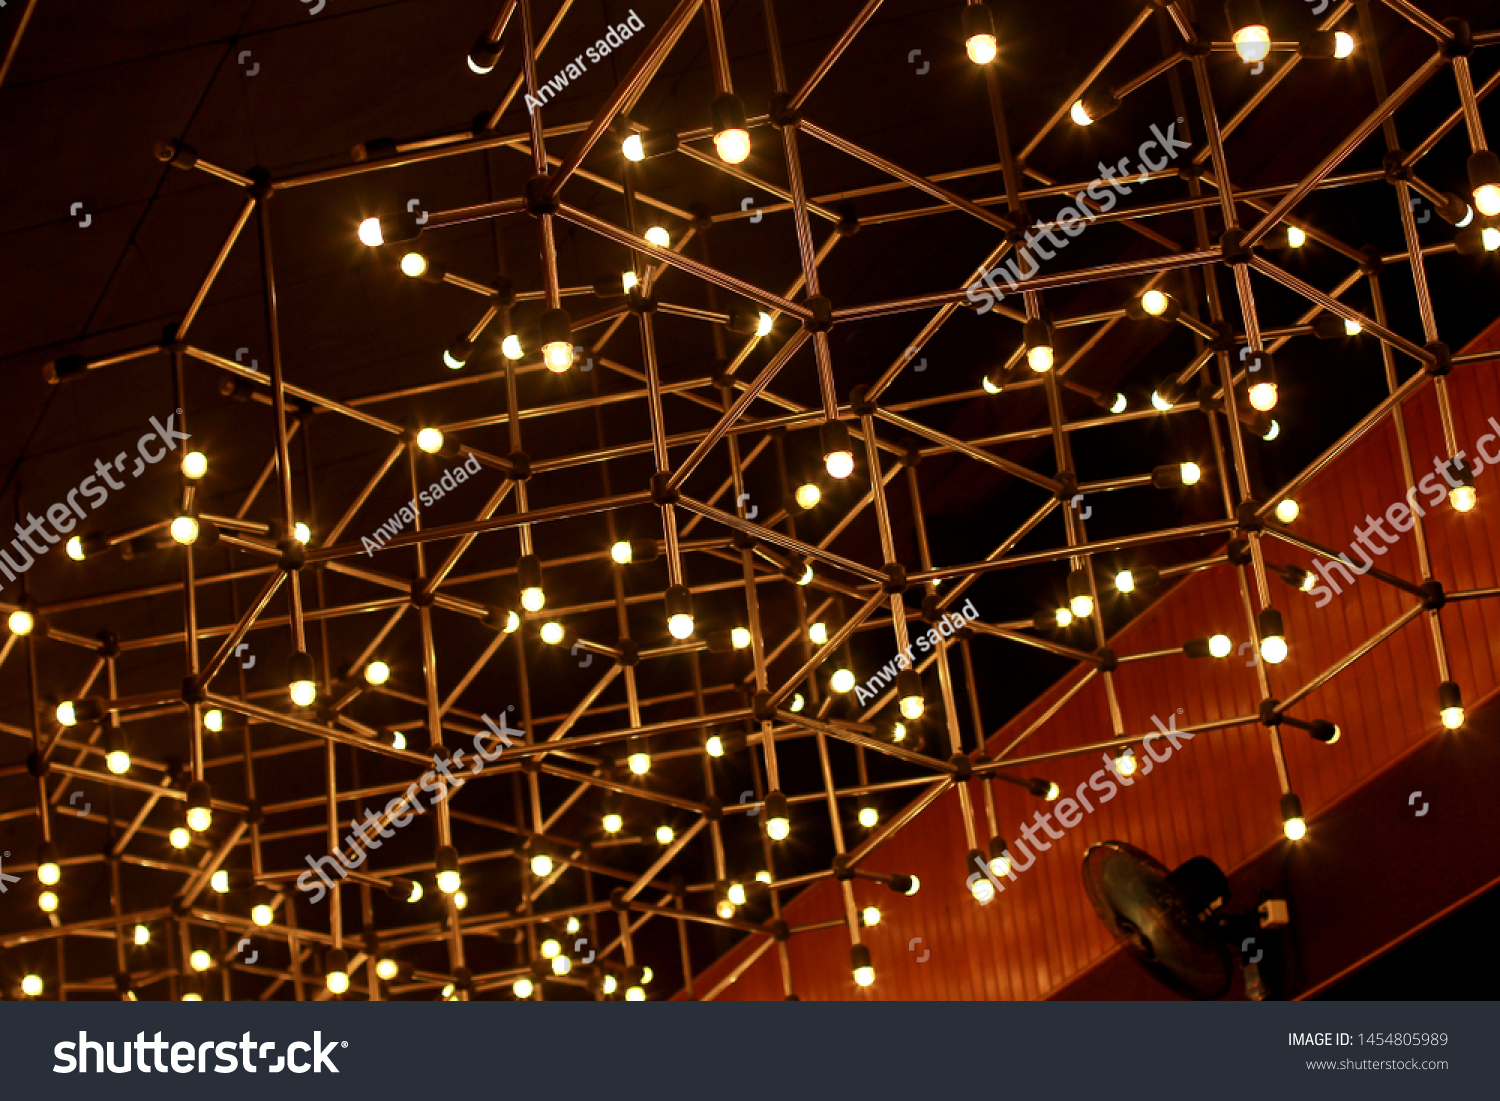 Hanging Lights Like Stars On Ceiling Stock Photo Edit Now